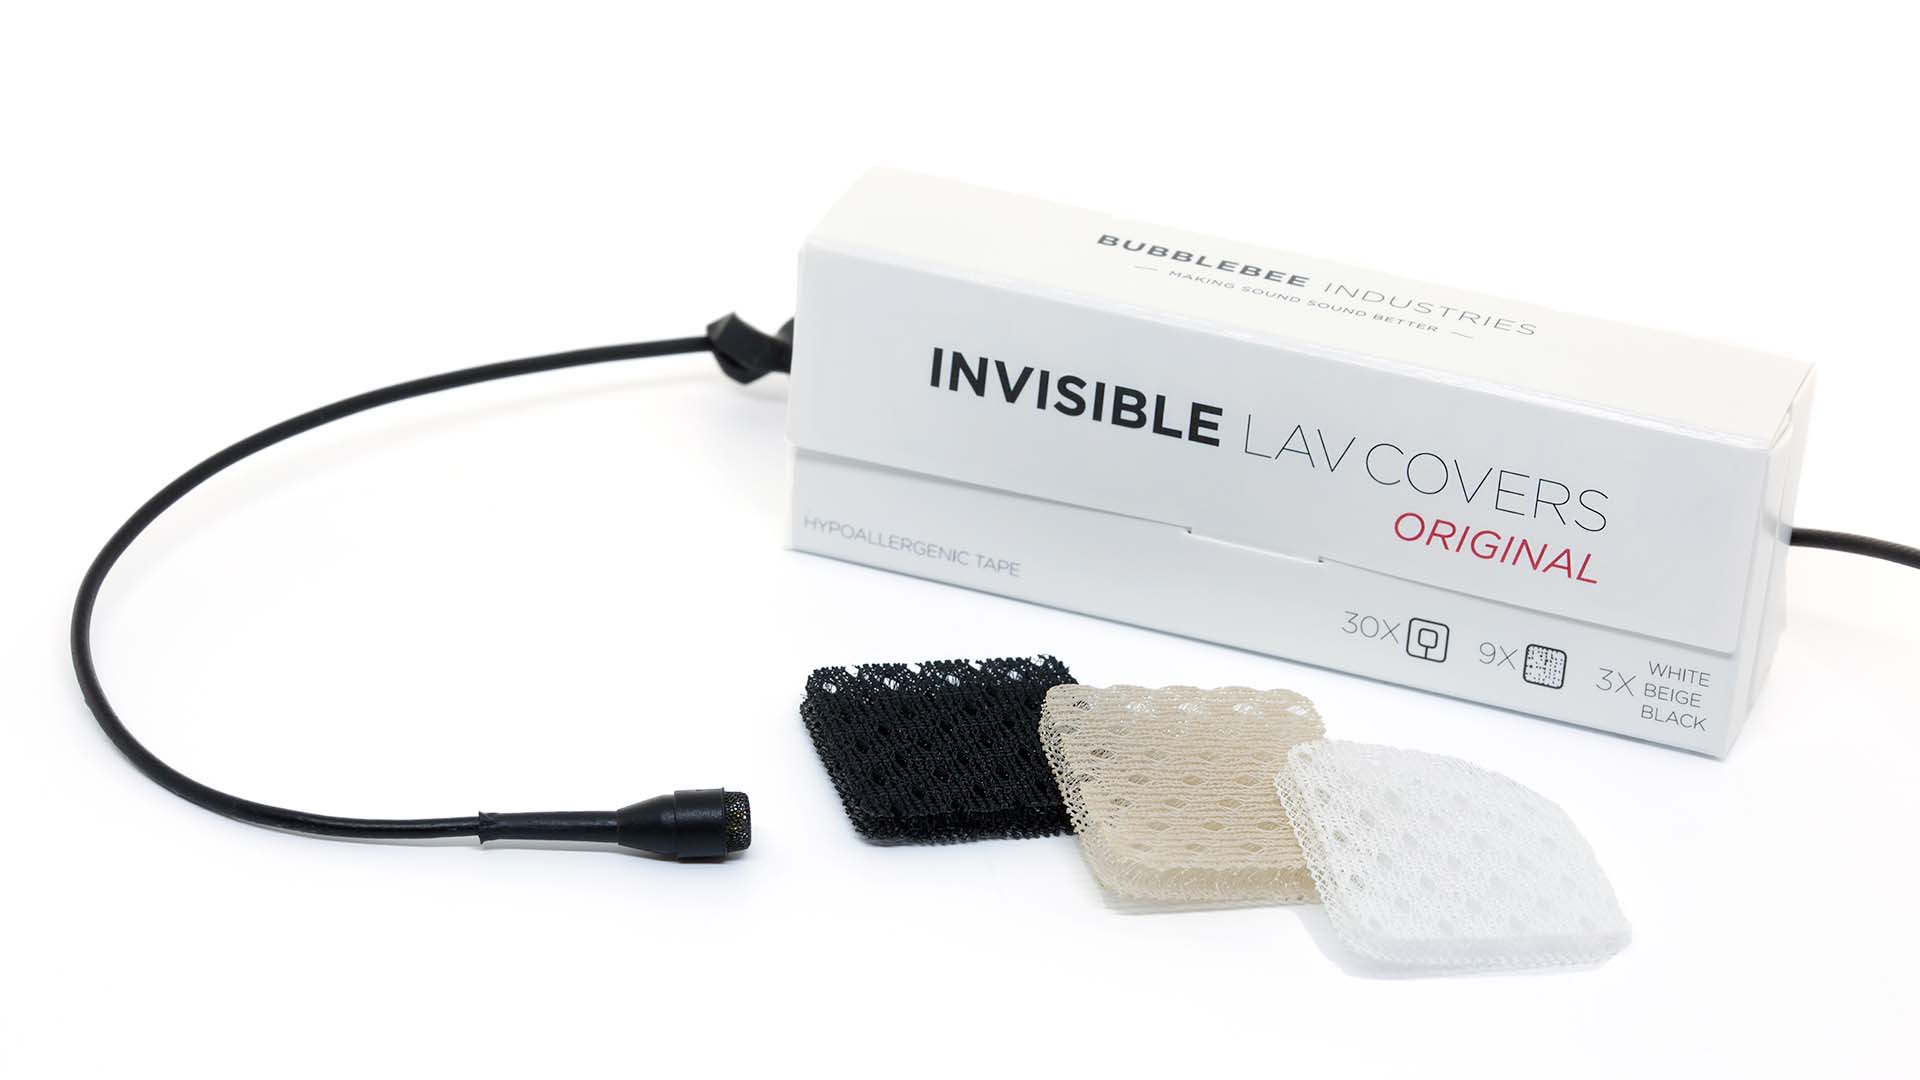 The Invisible Lav Covers Original New Colours